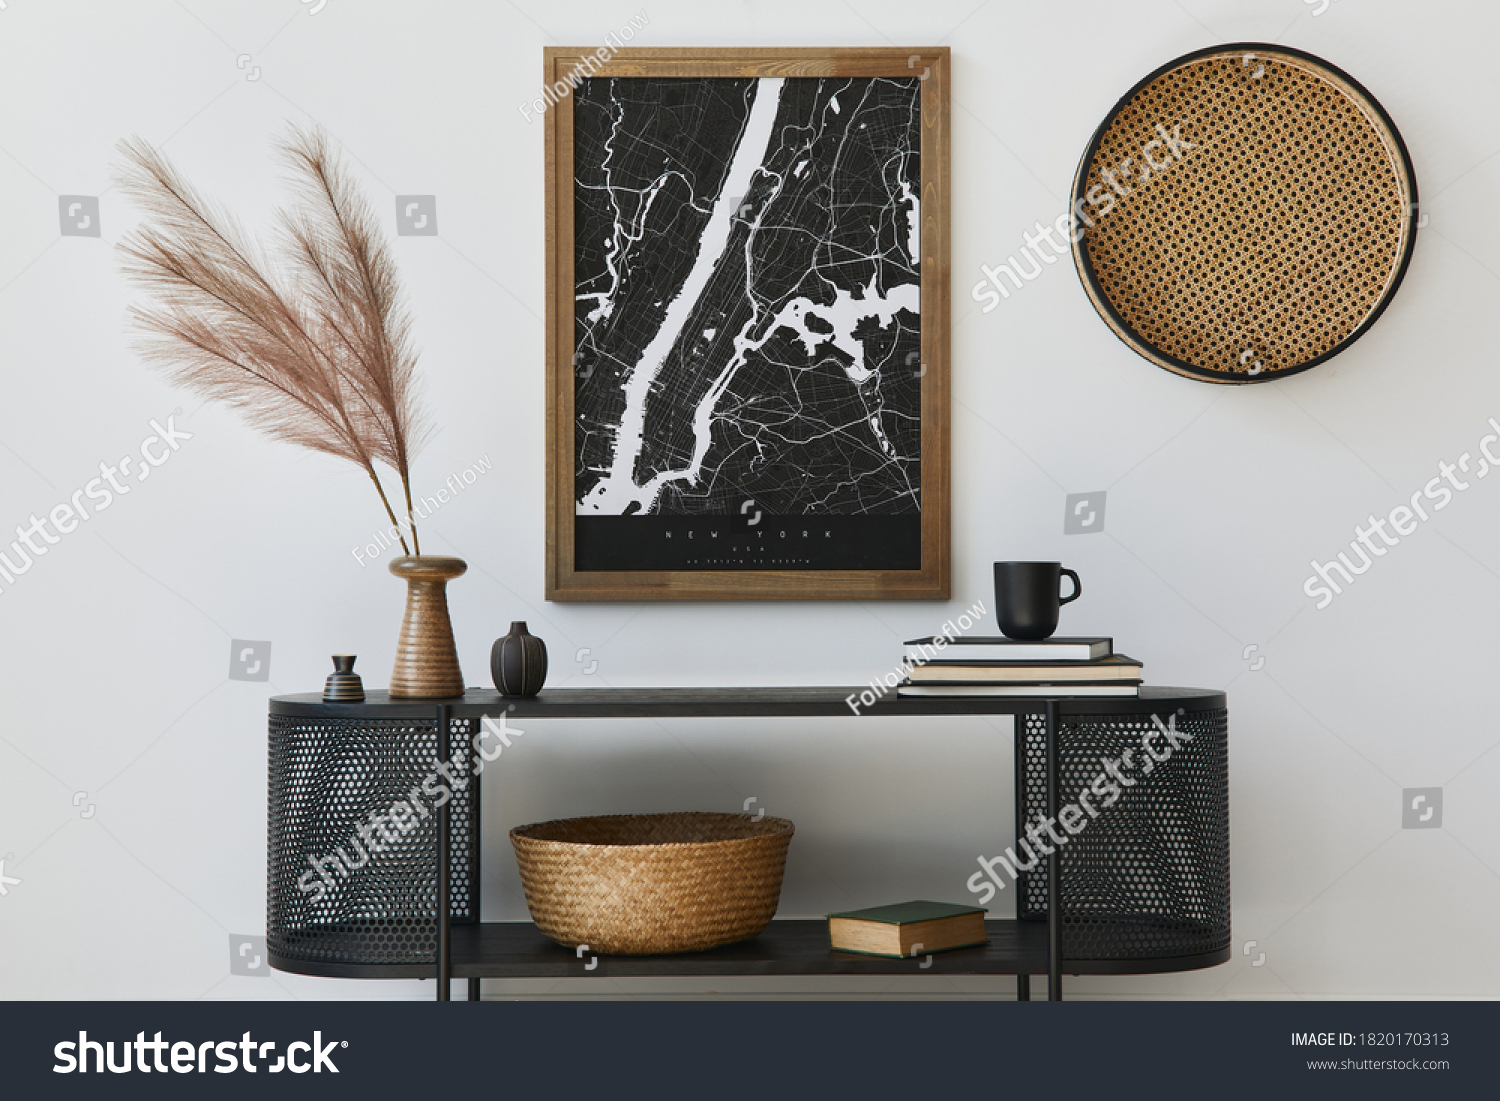 Modern scandinavian home interior with design wooden commode, mock up poster map, feather in vase, book and personal accessories in stylish home decor. Template. #1820170313